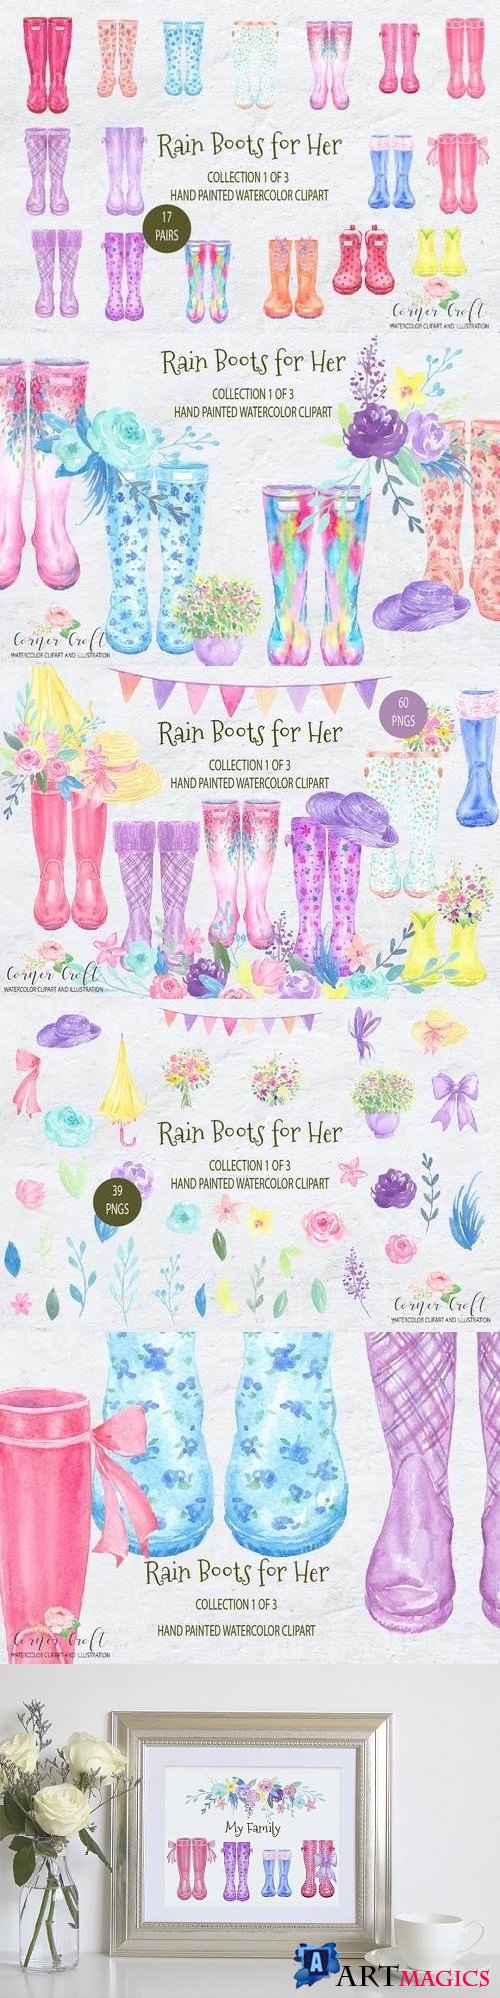 Watercolor Rain Boots for her - 2103988